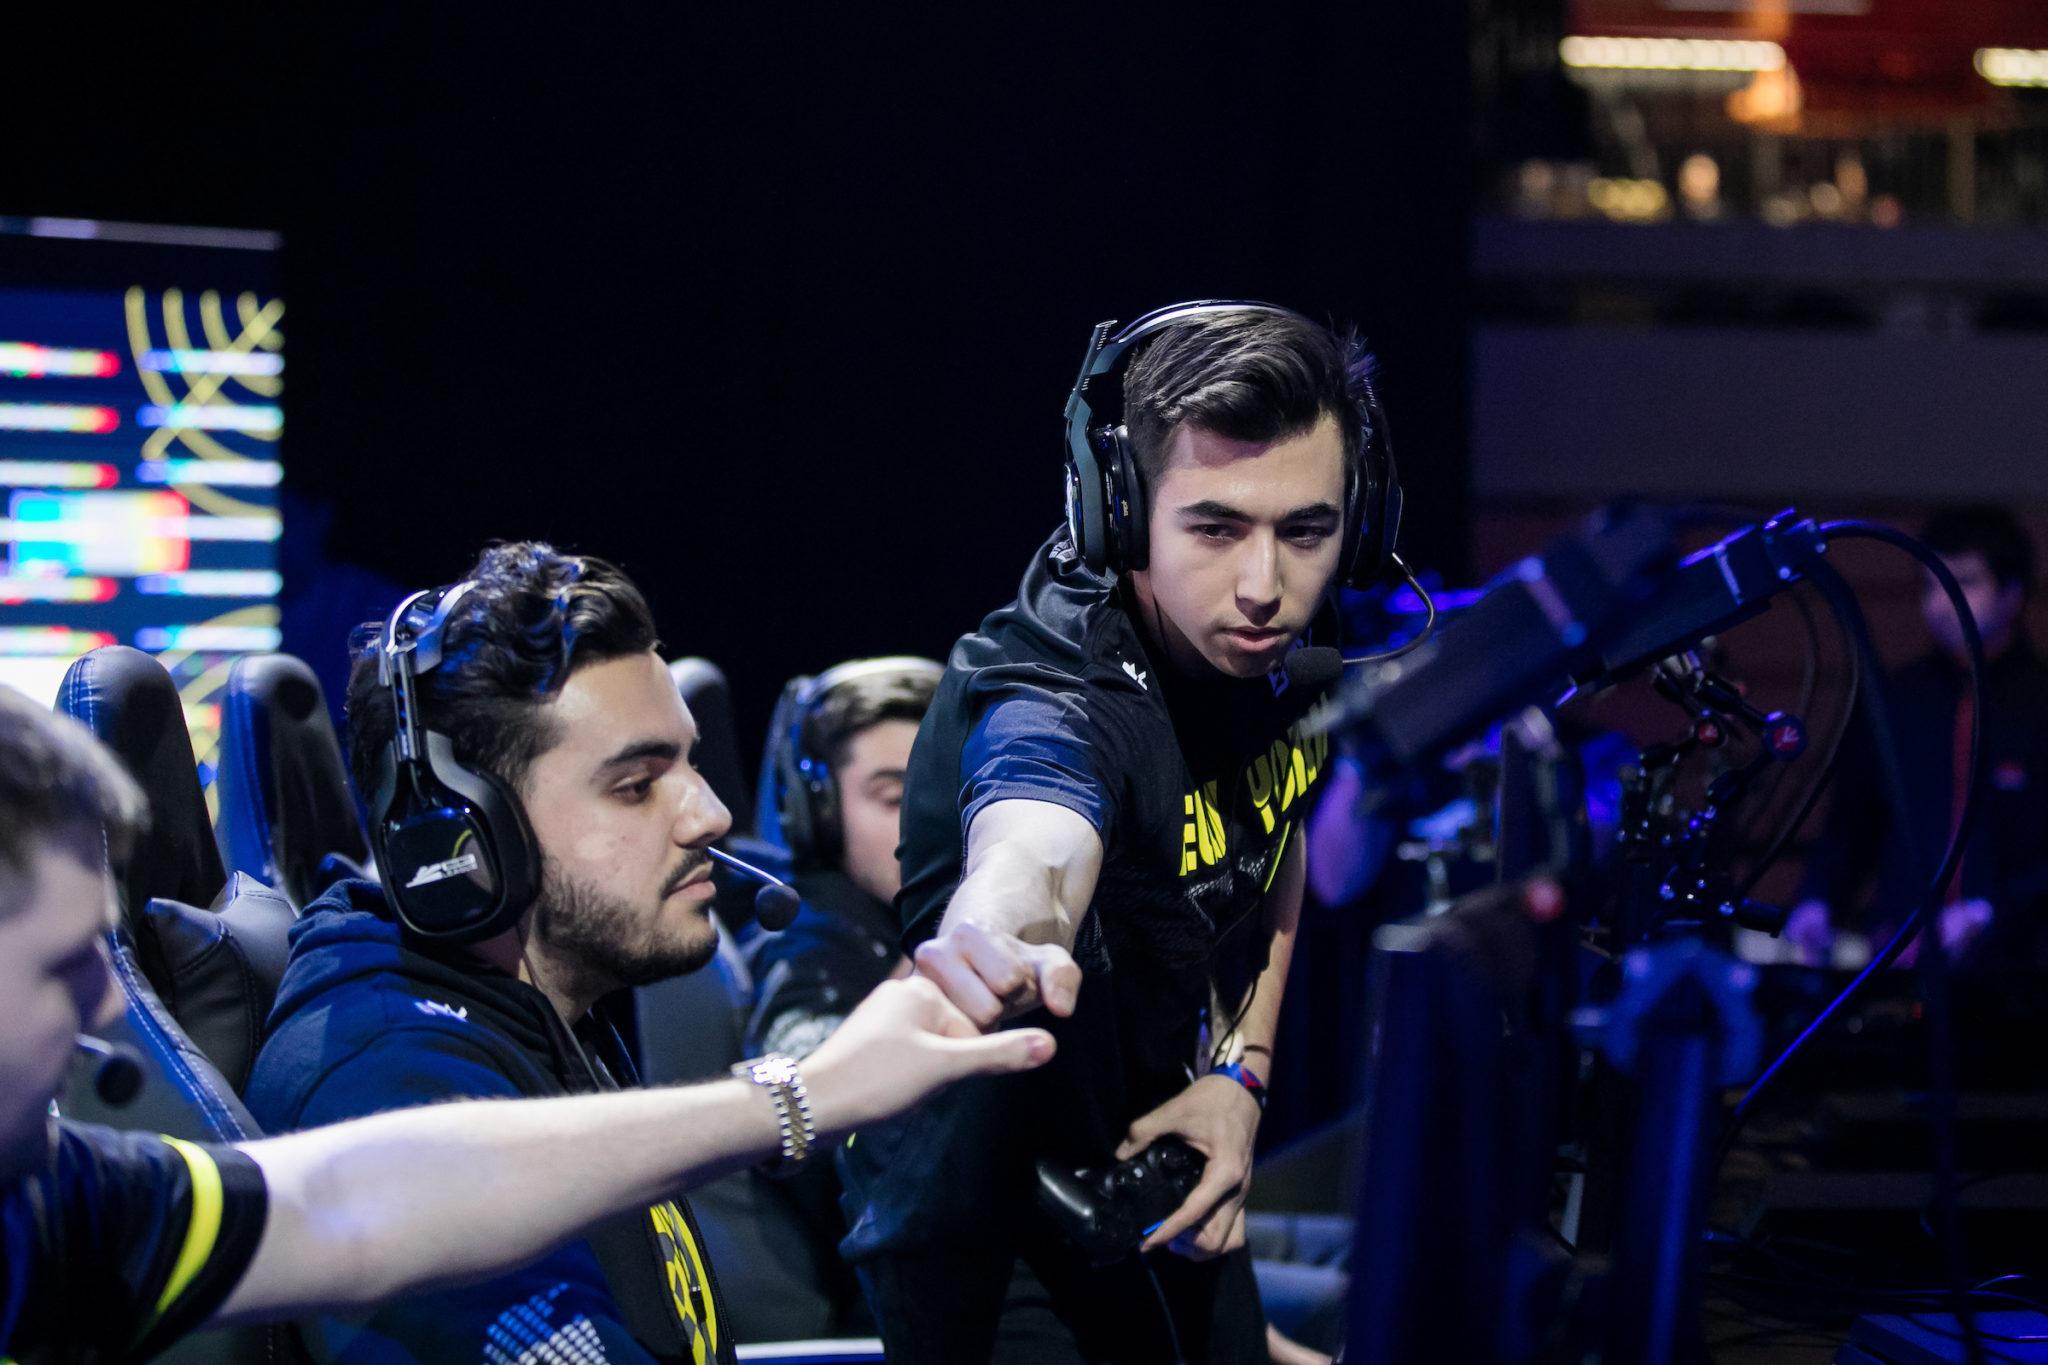 Attach and New York Subliners Call of Duty League team